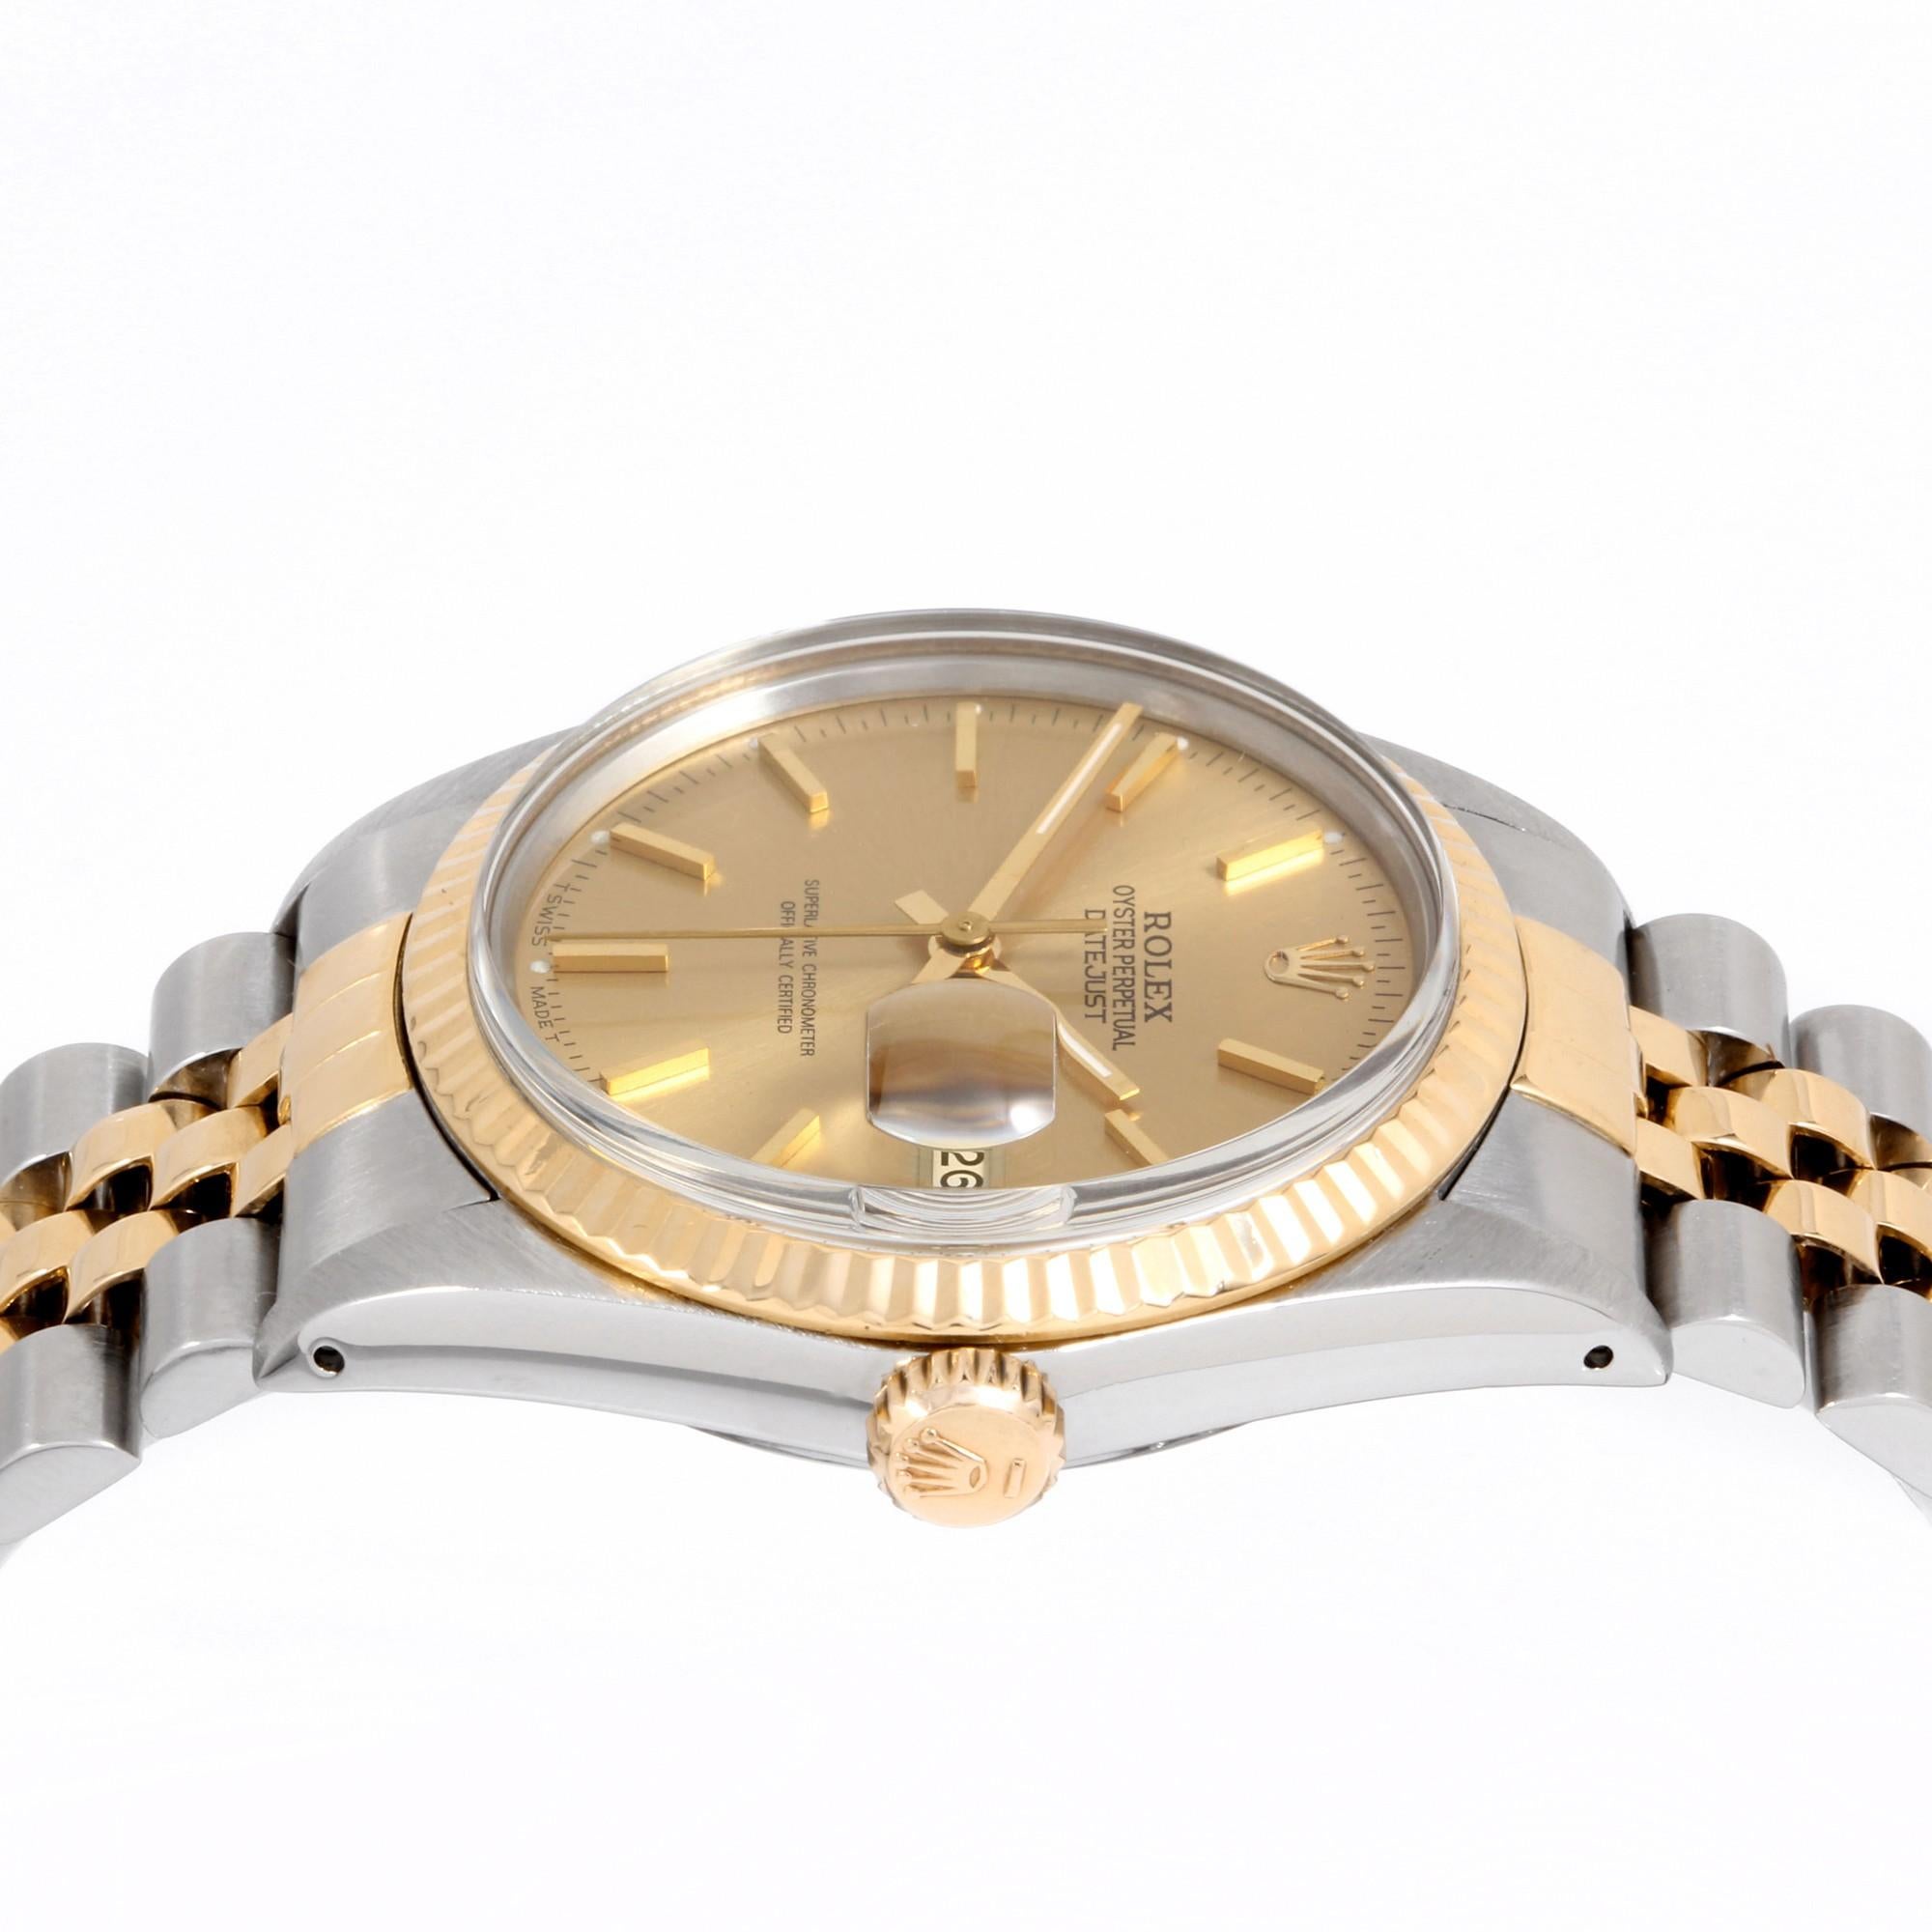 Rolex Datejust Reference #:16013. . Verified and Certified by WatchFacts. 1 year warranty offered by WatchFacts.